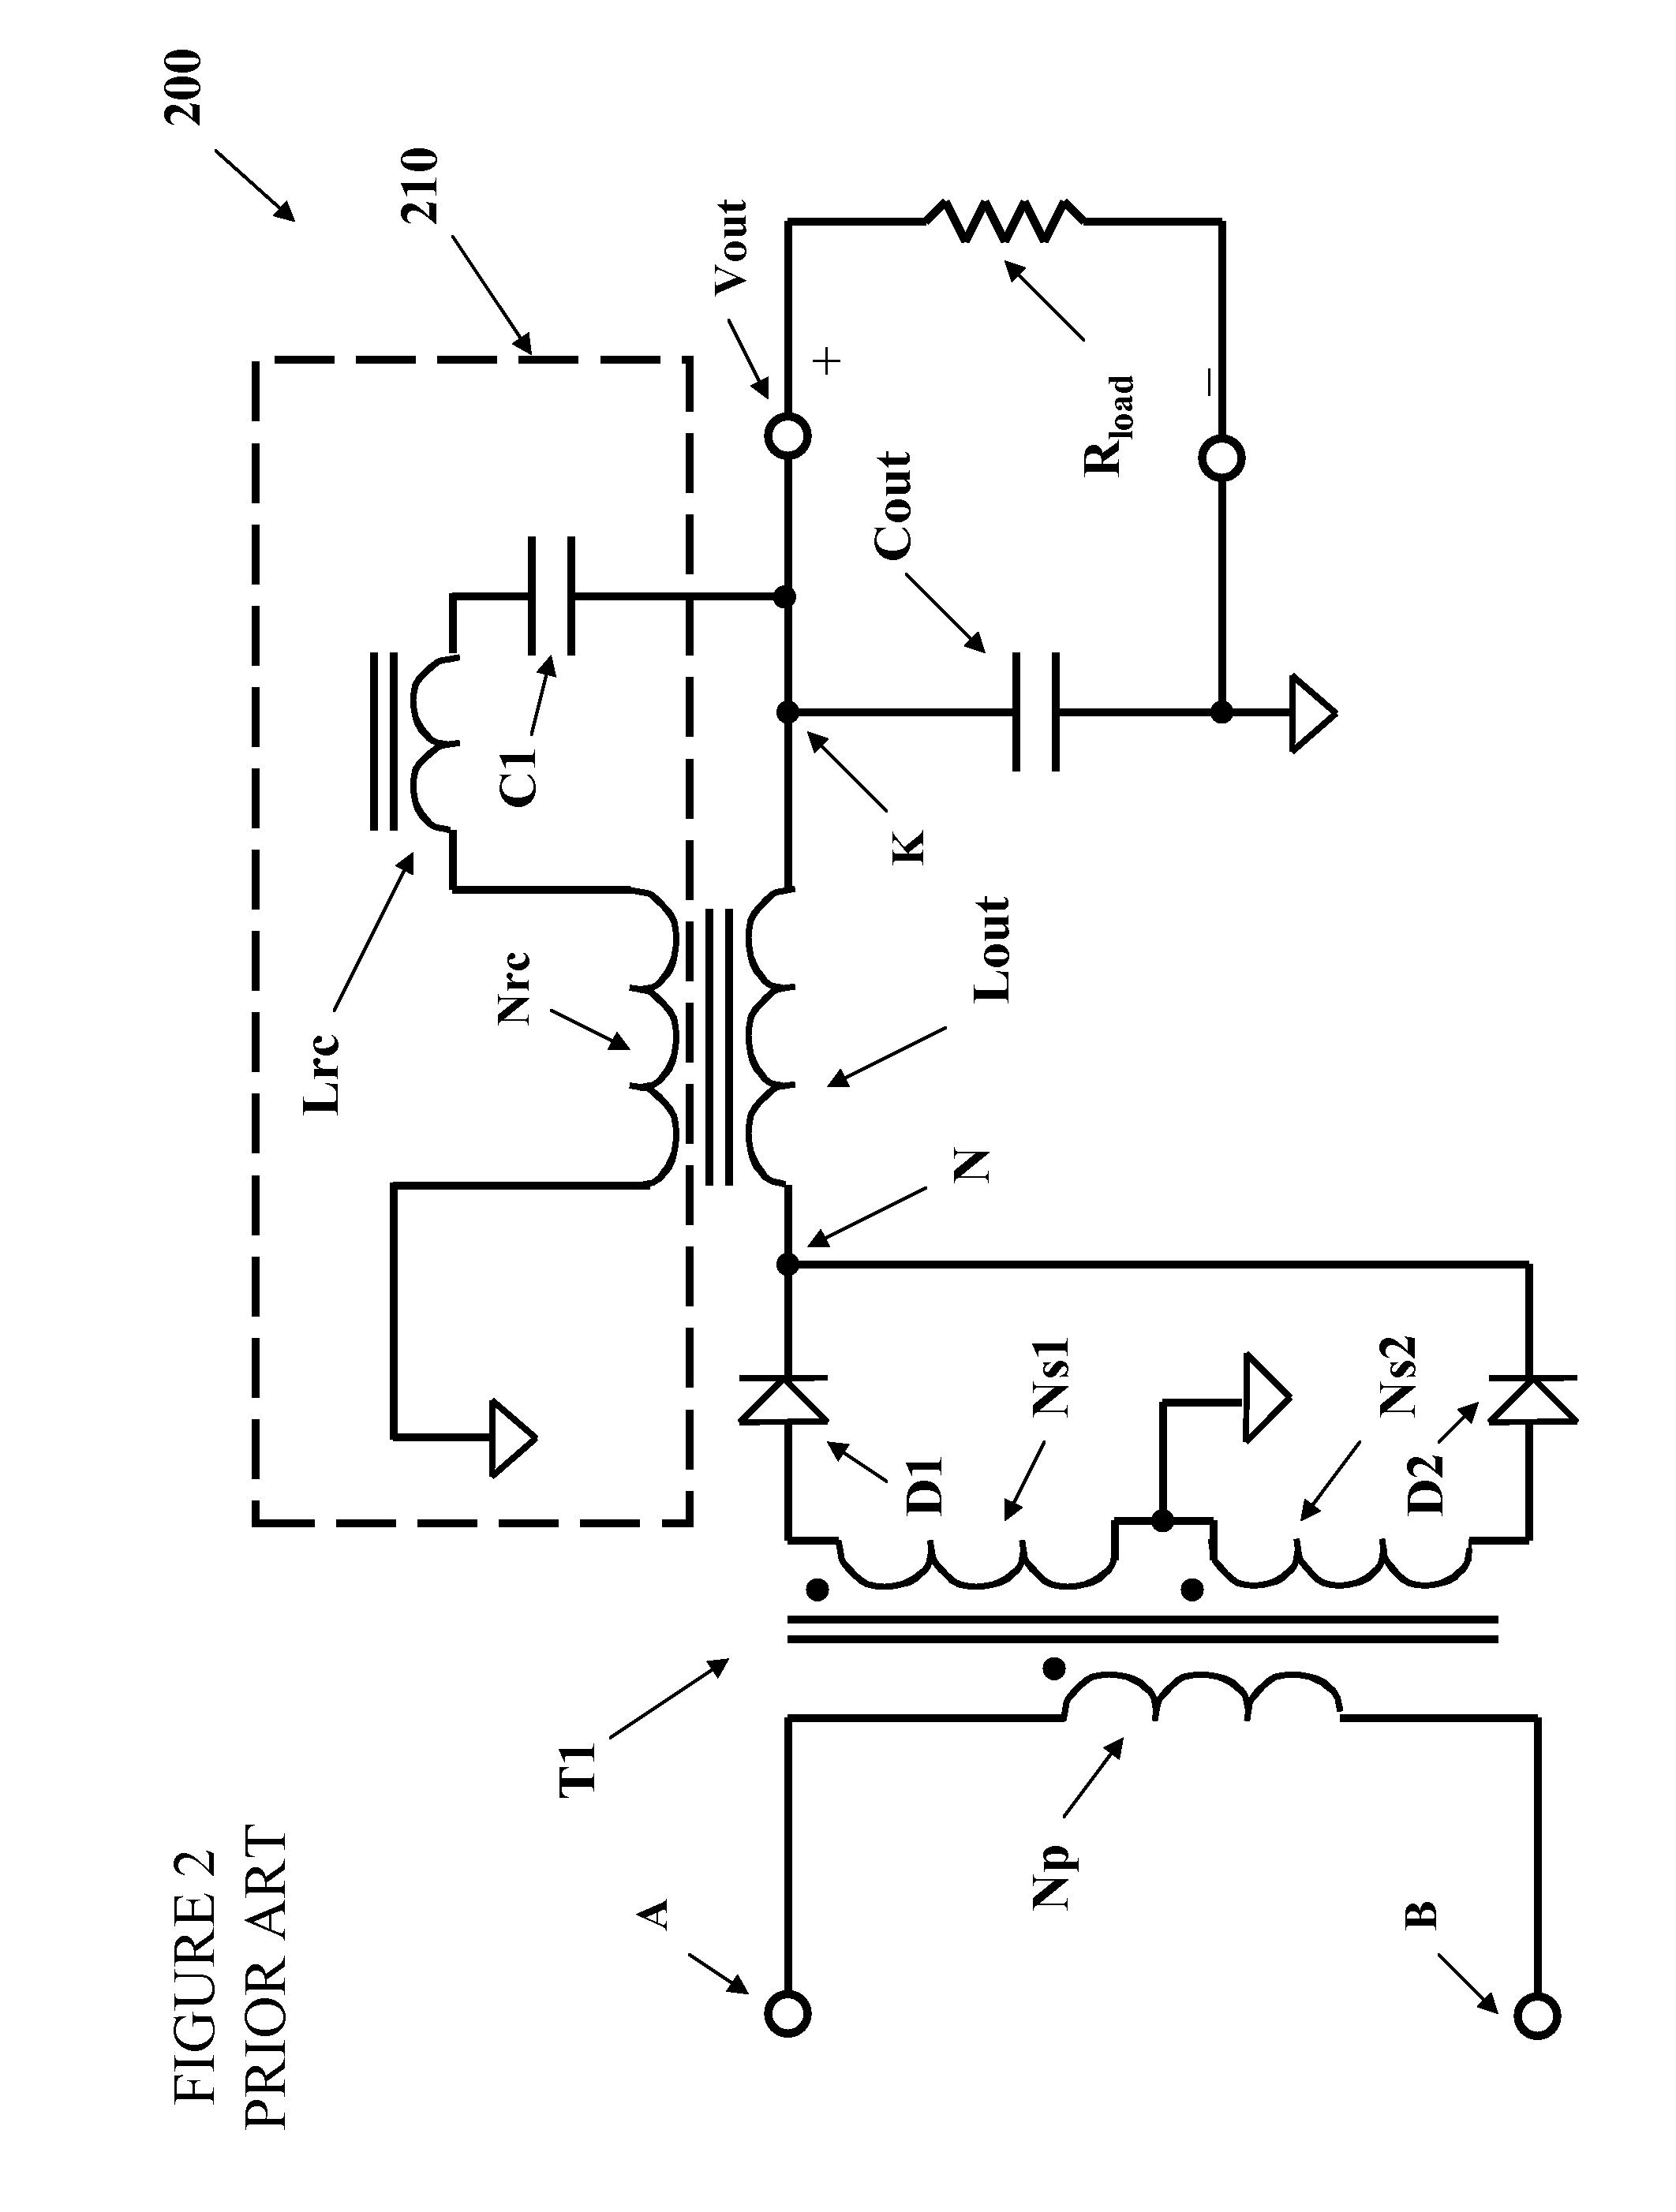 Ripple Reduction for Switch-Mode Power Conversion